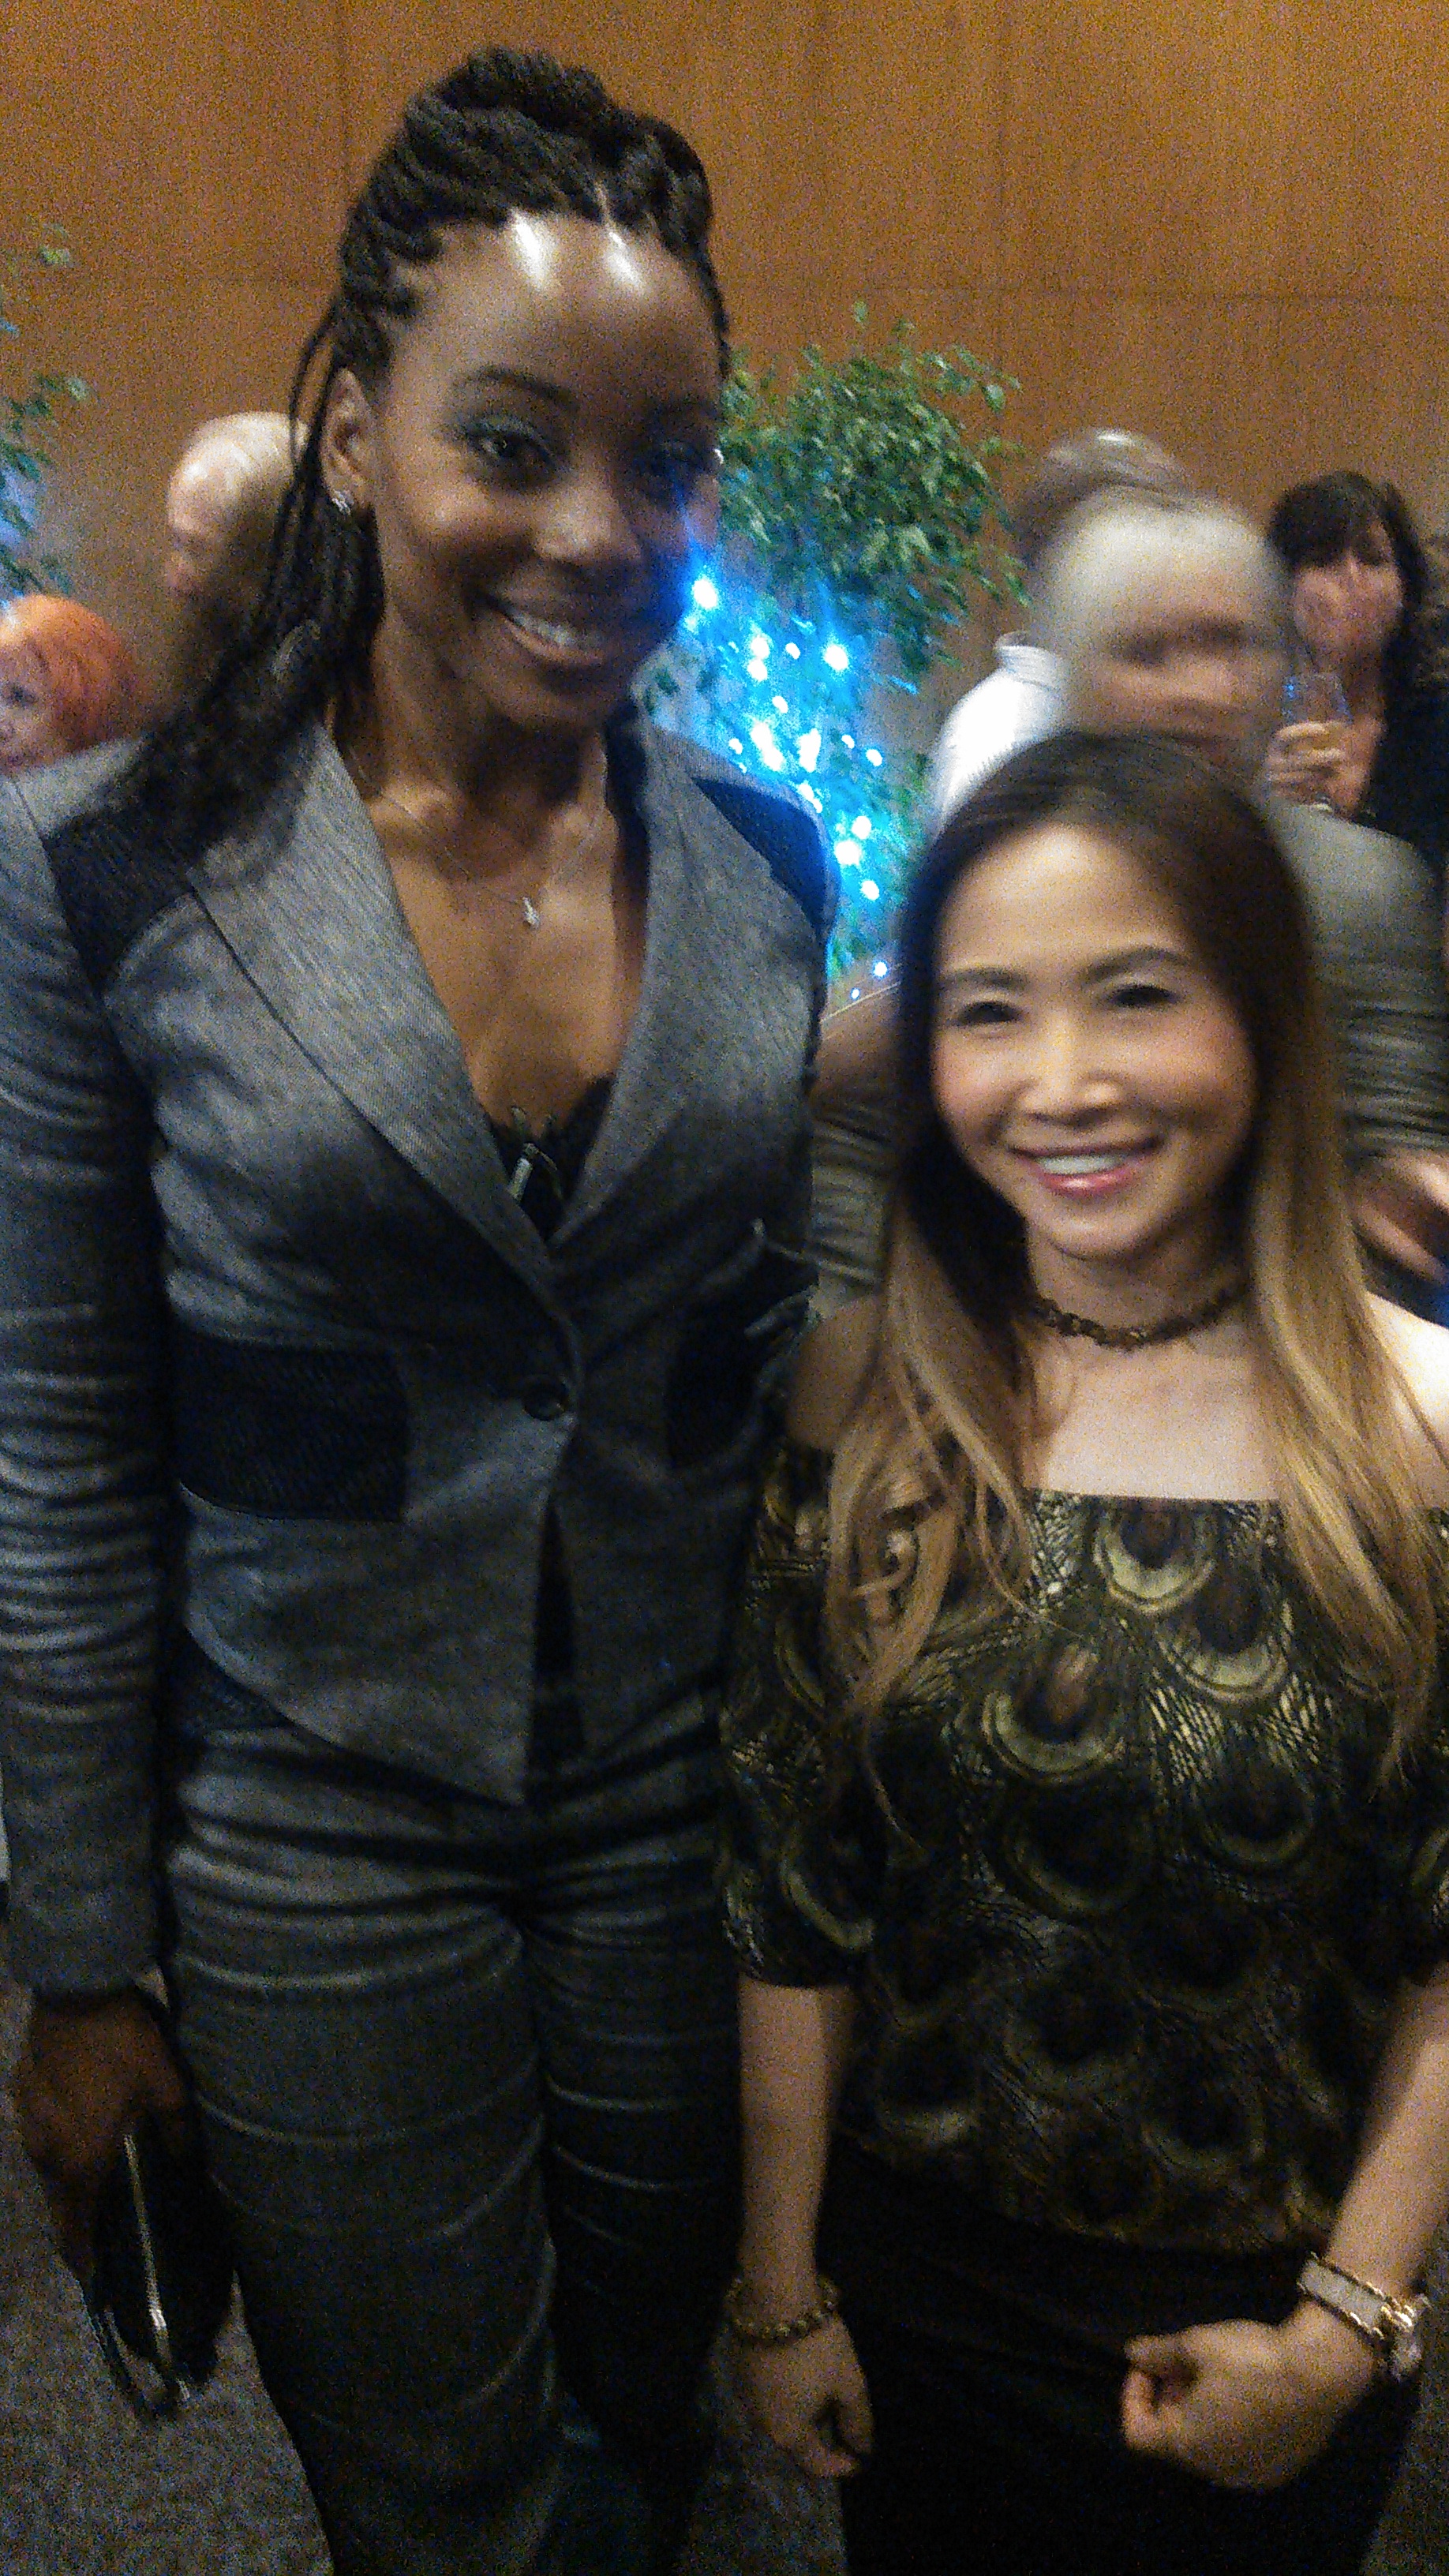 Tracy Mcnulty and Erica Ash at Survivor Remorse Screening Event at Directors Guild Of America